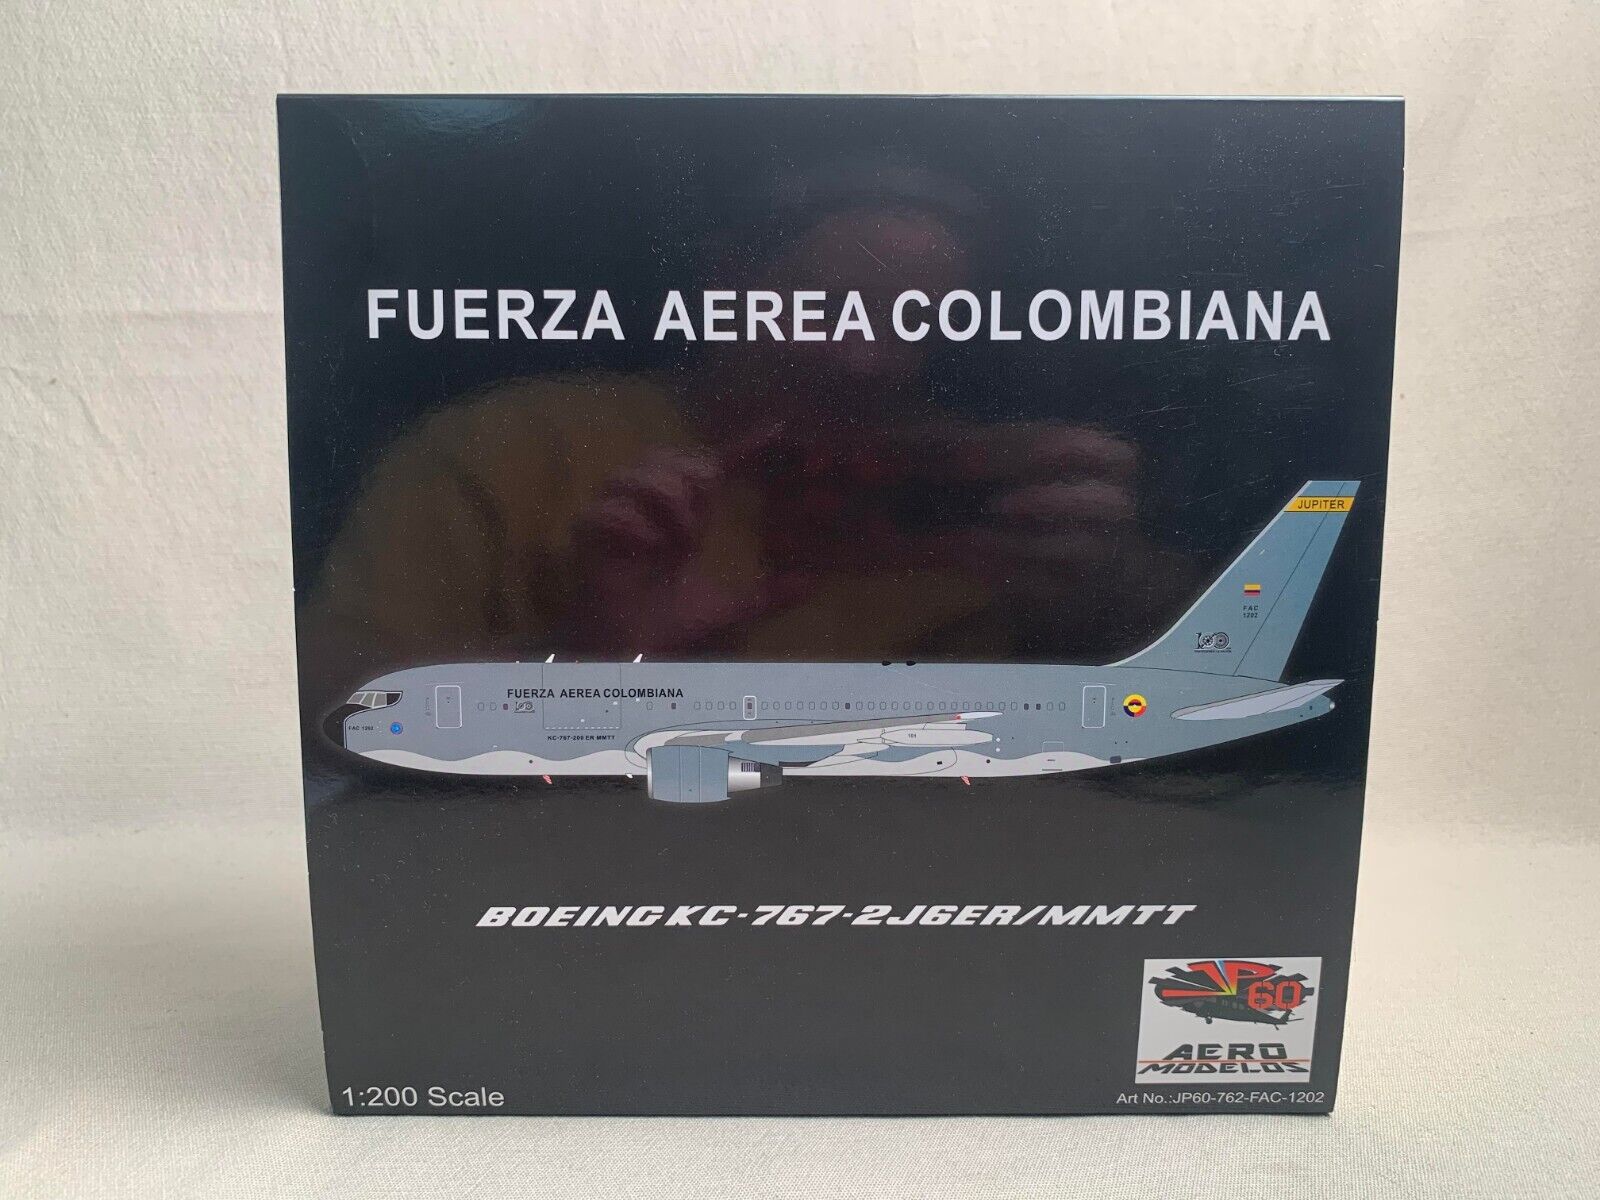 NEW Inflight 200 Fuerza Aerea Colombiana KC-767-2J6ER/MMTT Colombian Air Force 